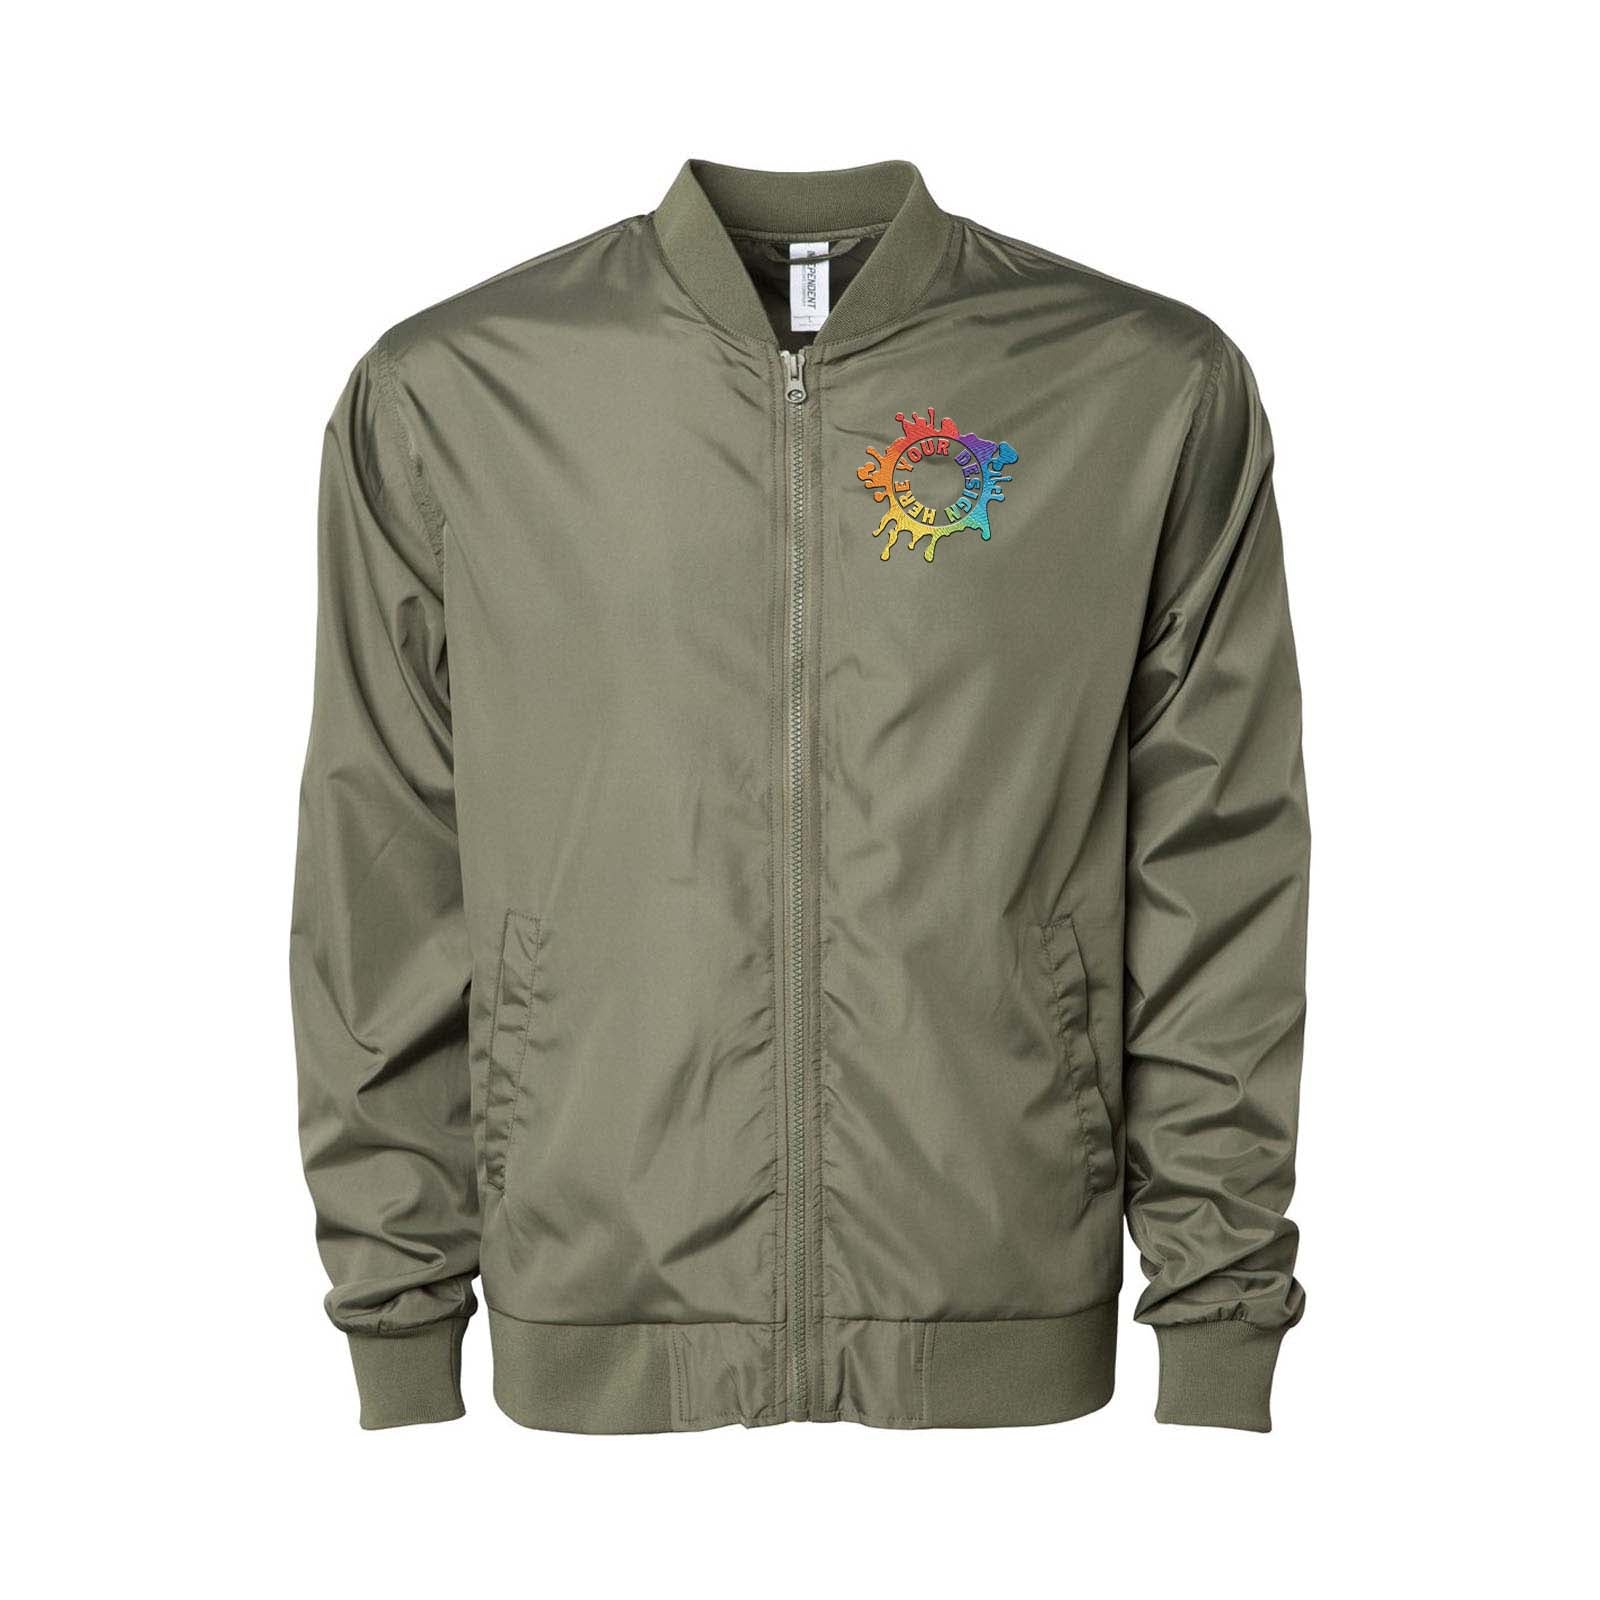 Independent Trading Co. - Lightweight Bomber Jacket Embroidery - Mato & Hash